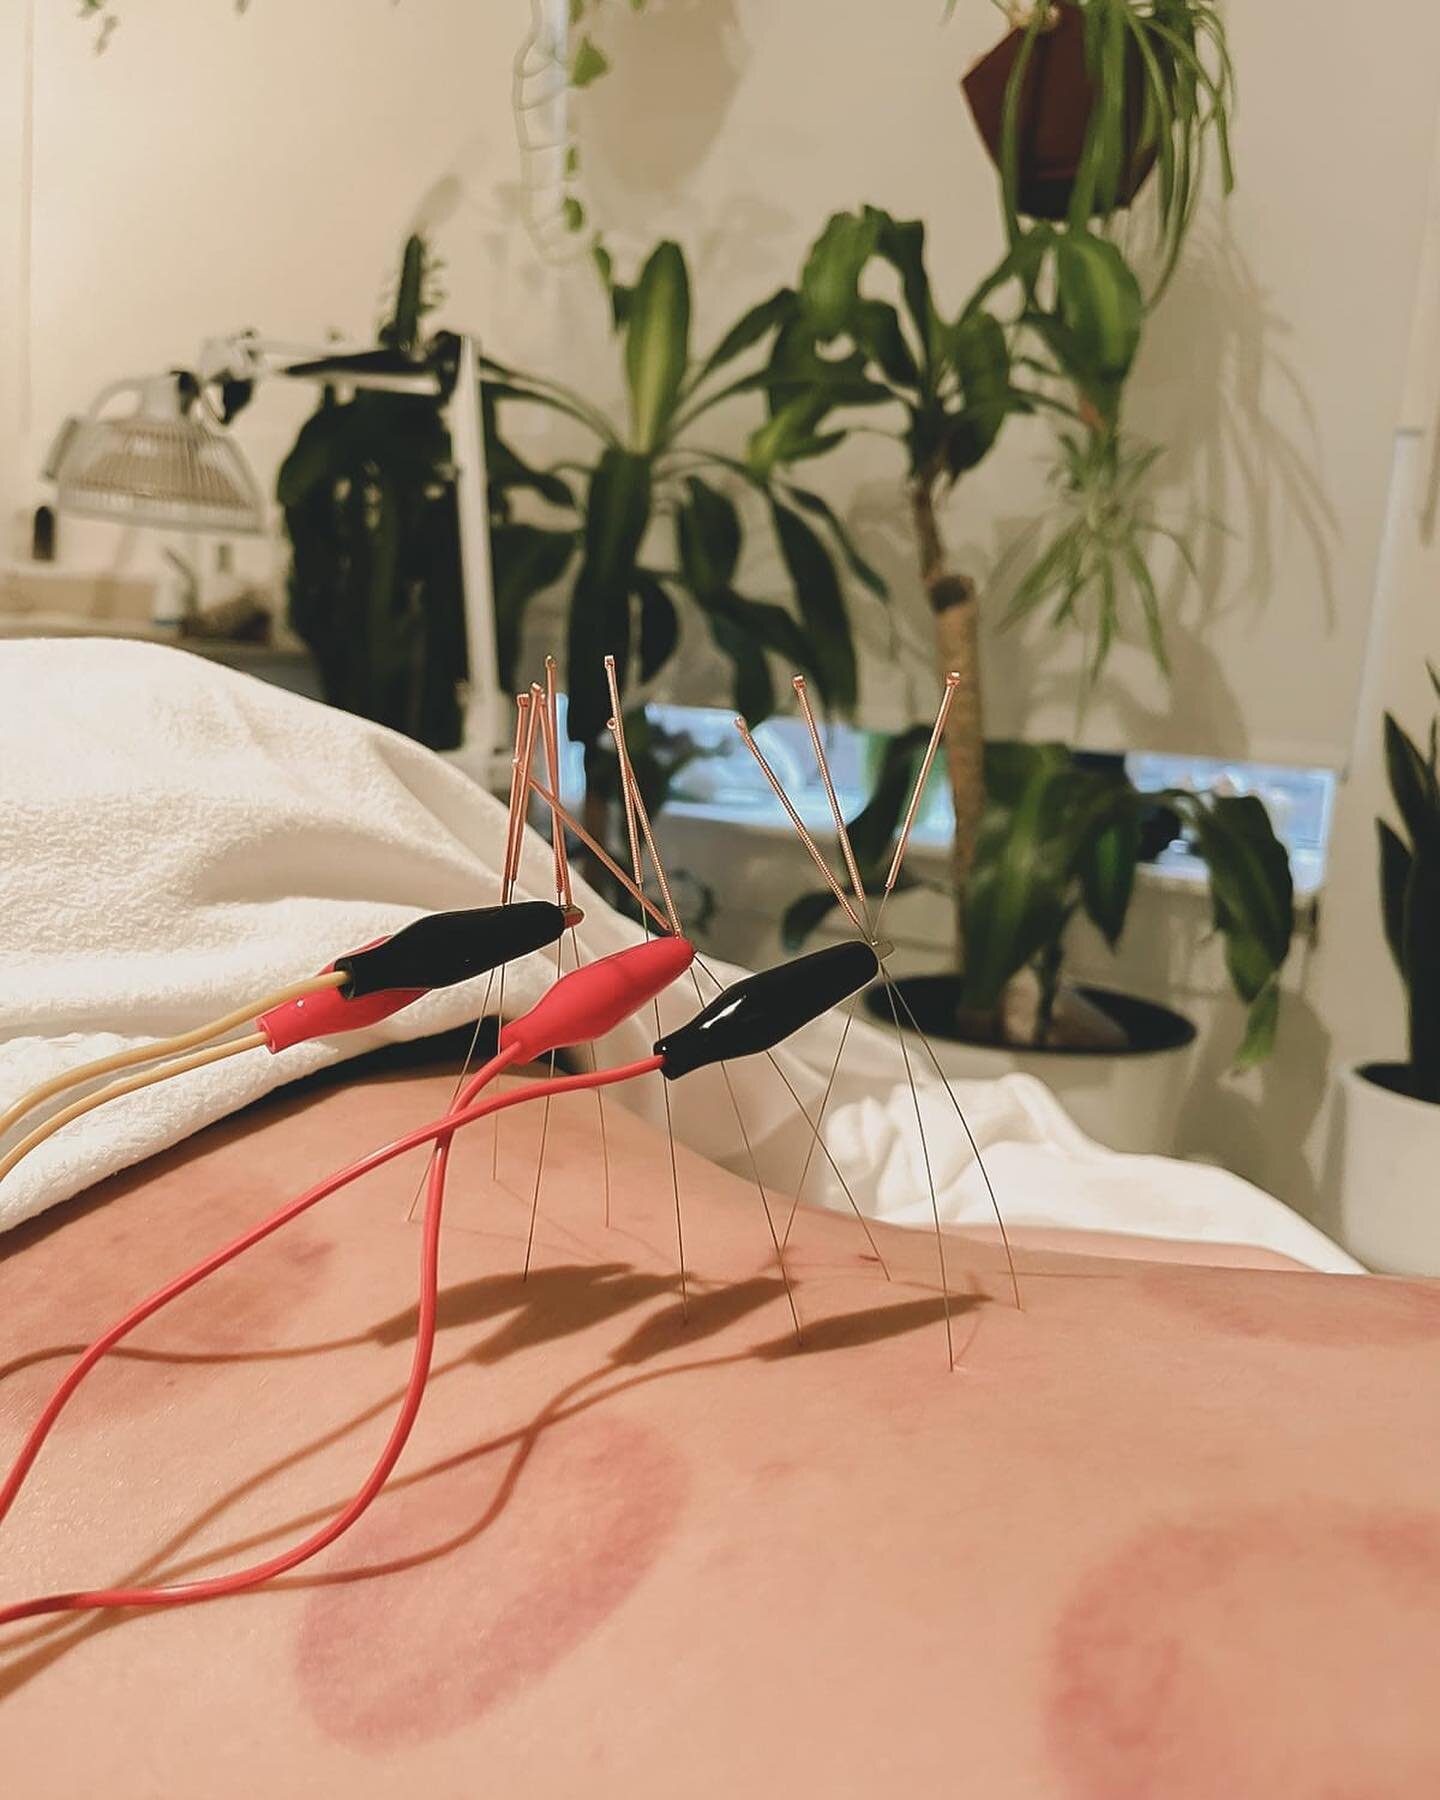 This perfusion treatment in the lower back vasodilates the blood vessels in the local area, pelvis, and the lower extremities, allowing more oxygen and nutrient flow the areas to heal tissues. In this case it is working wonders for chronic low back p